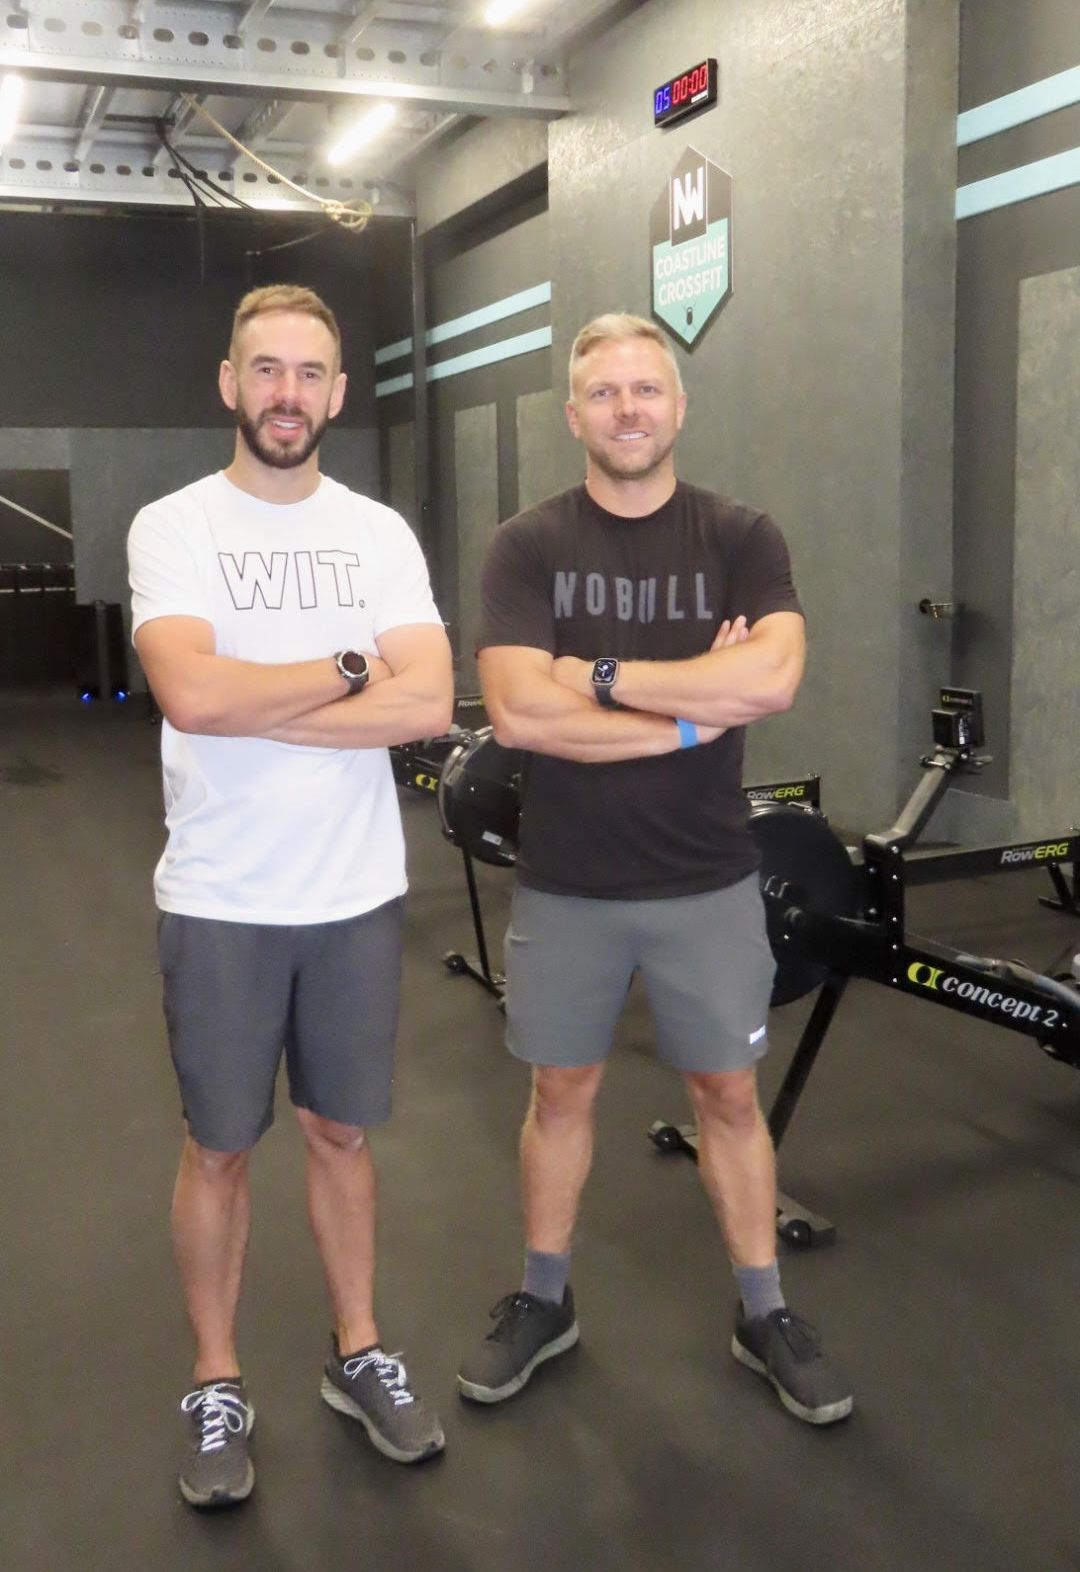 Josh Womersley (left) and Tim Brown (right) at Coastline CrossFit at Ocean Plaza Leisure in Southport. Photo by Andrew Brown Stand Up For Southport